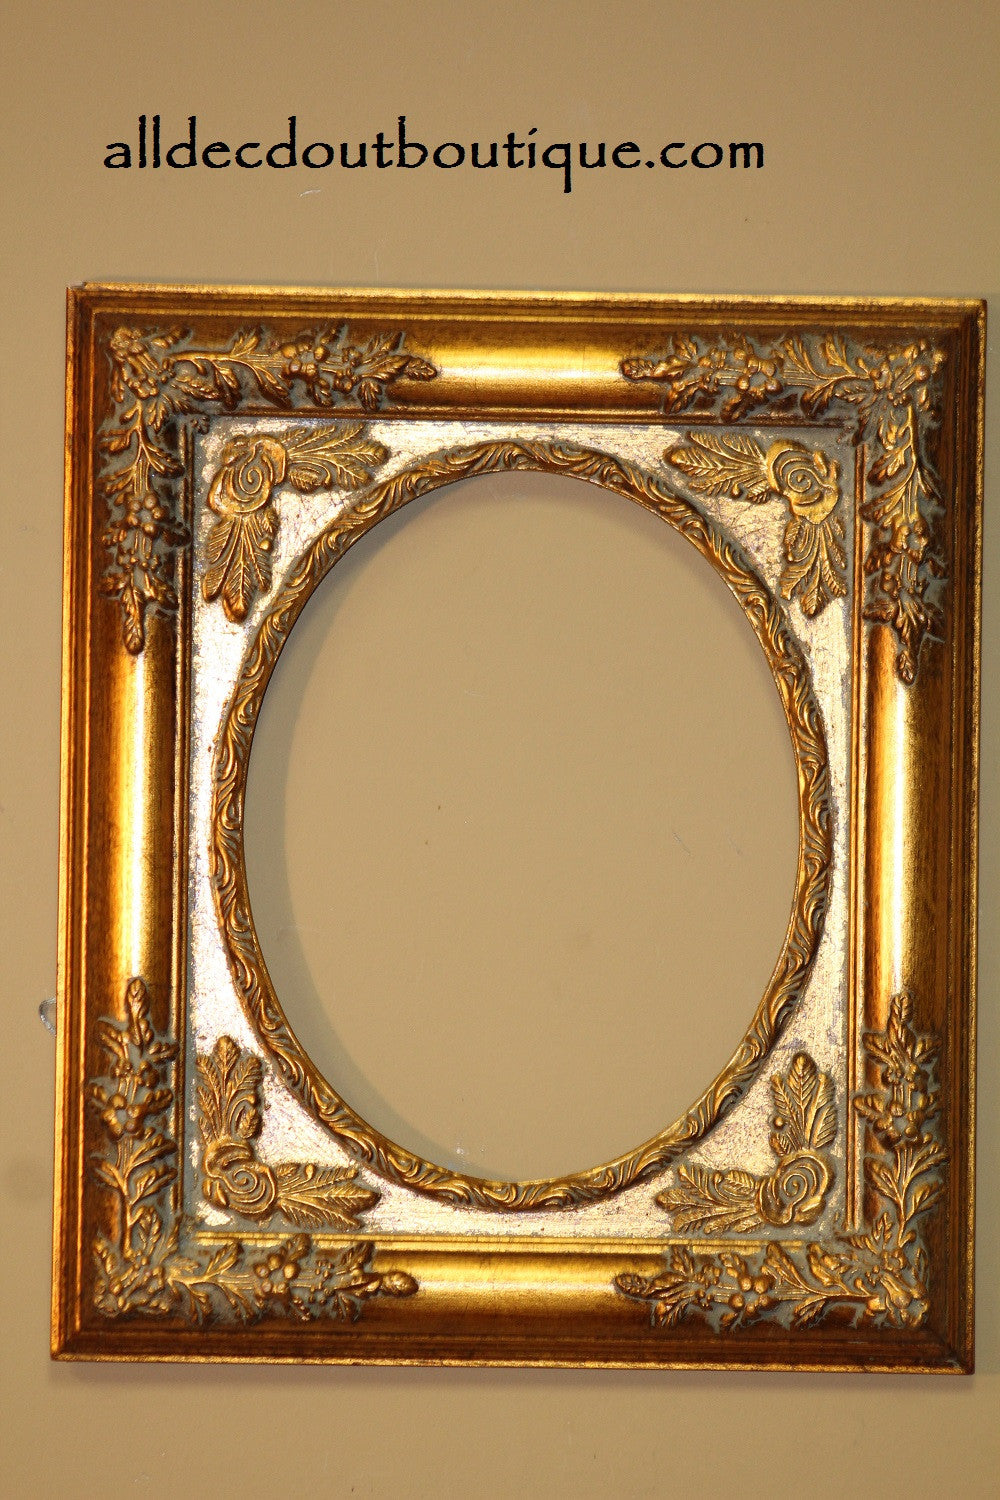 Decorative Picture Frame| Wall Hanging 8